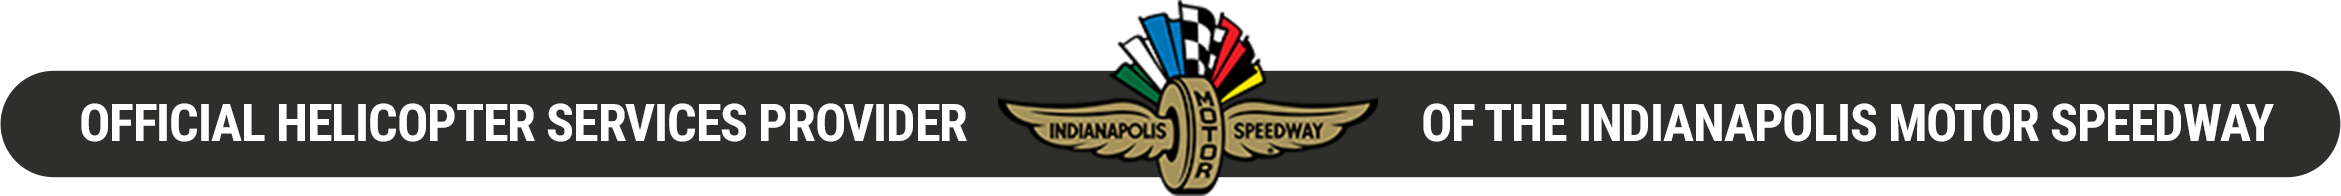 Official Helicopter Service Provider of the Indianapolis Motor Speedway